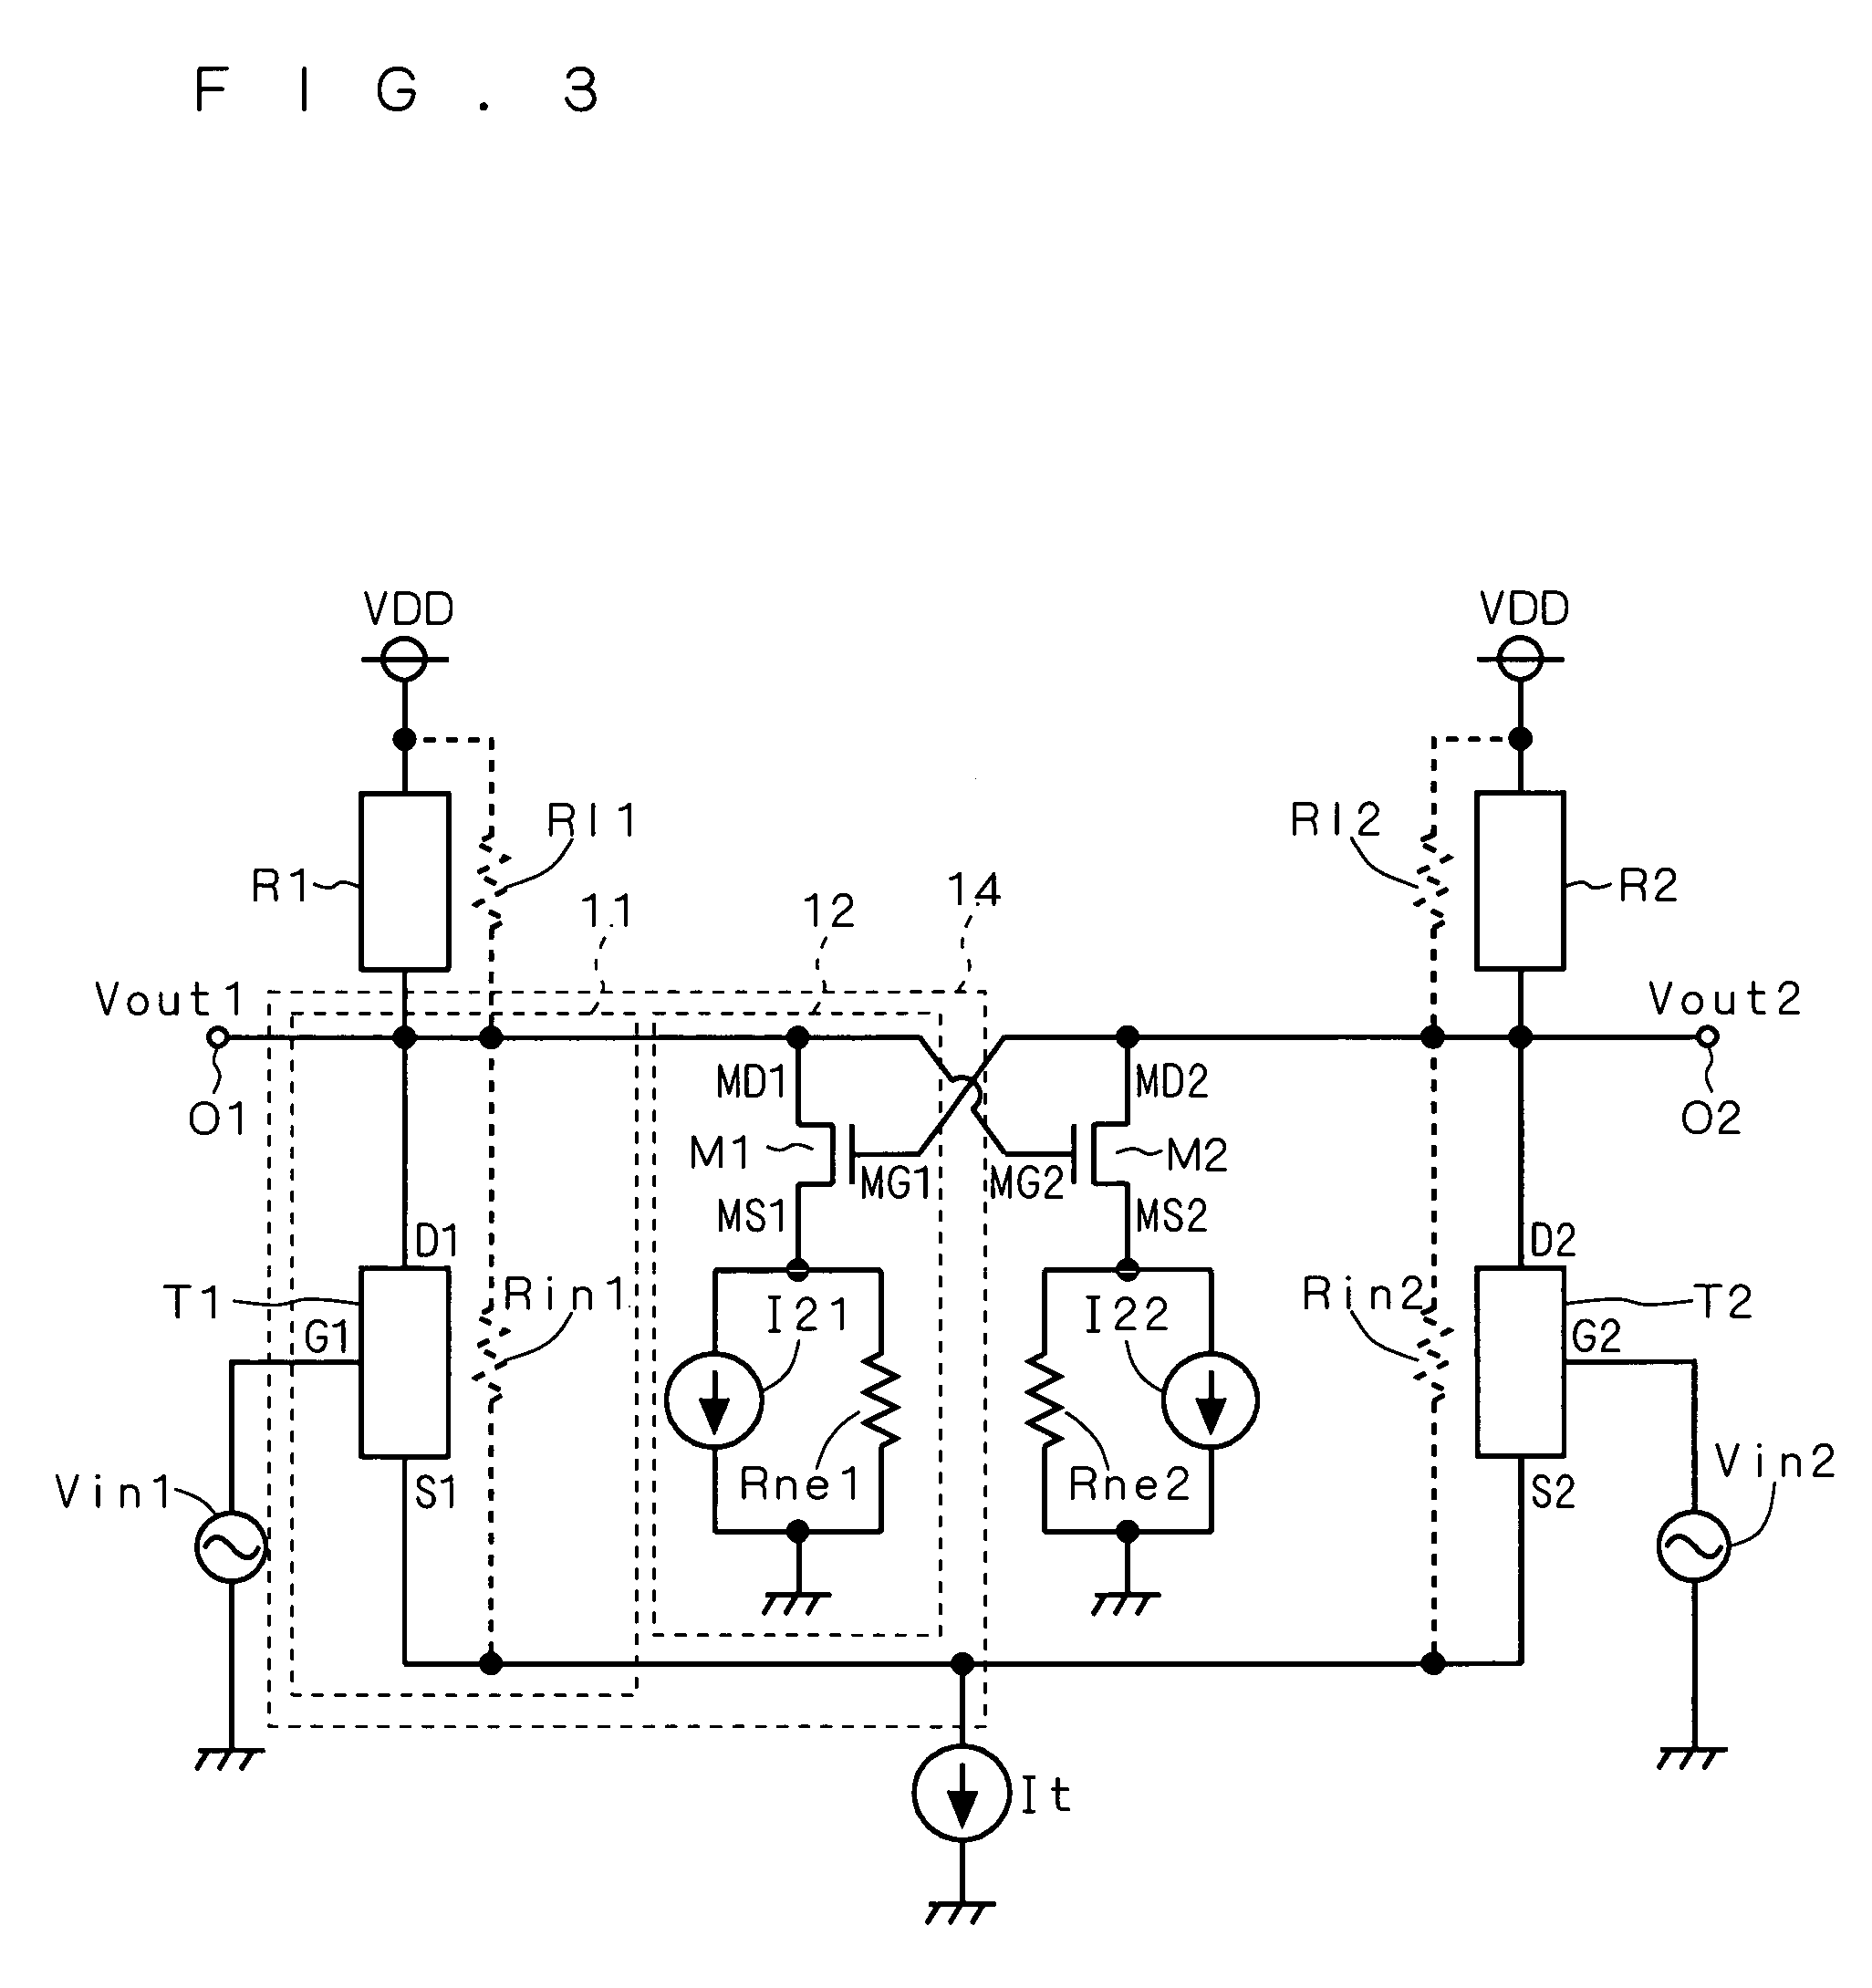 Current source circuit and differential amplifier